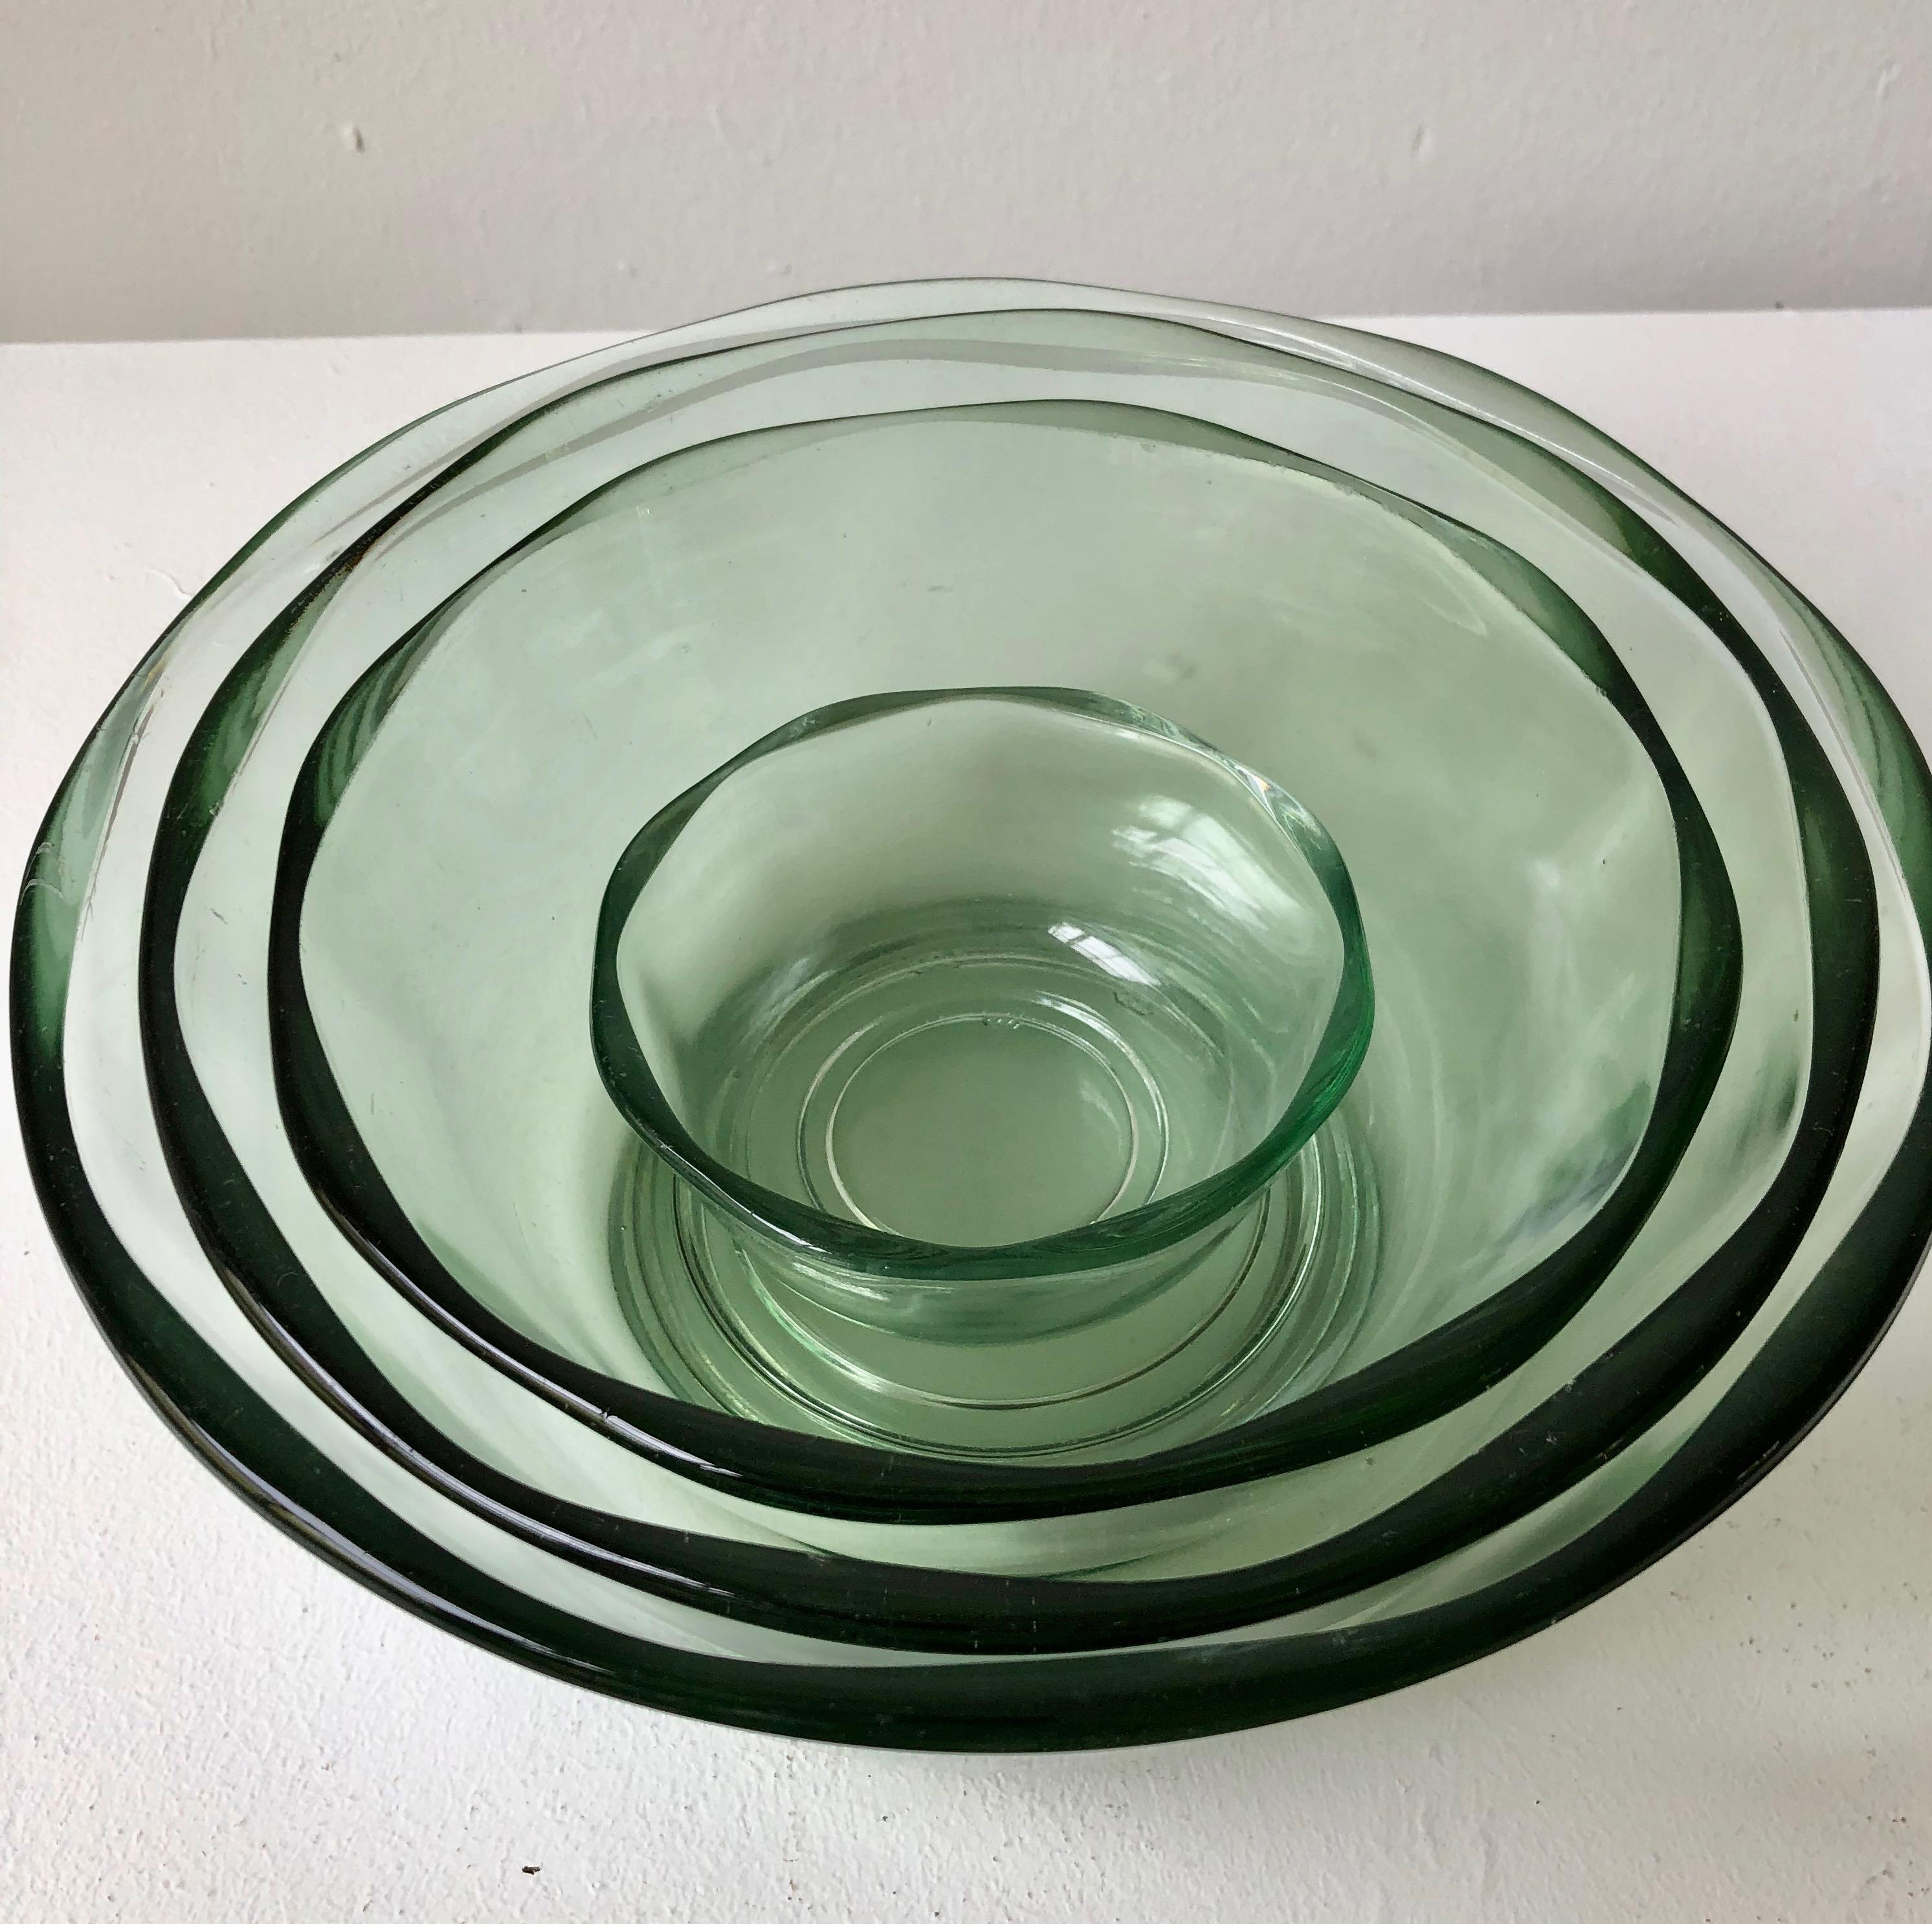 Rare set of 4 bowls, mod. Erbach designed by Wilhelm Wagenfeld and manufactured by Vereinigte Lausitzer Glaswerke. Design 1938 and production in the 1930ies, all bowls with pressed mark of Vereinigte Lausitzer Glaswerke in form of a rhomb. Size of